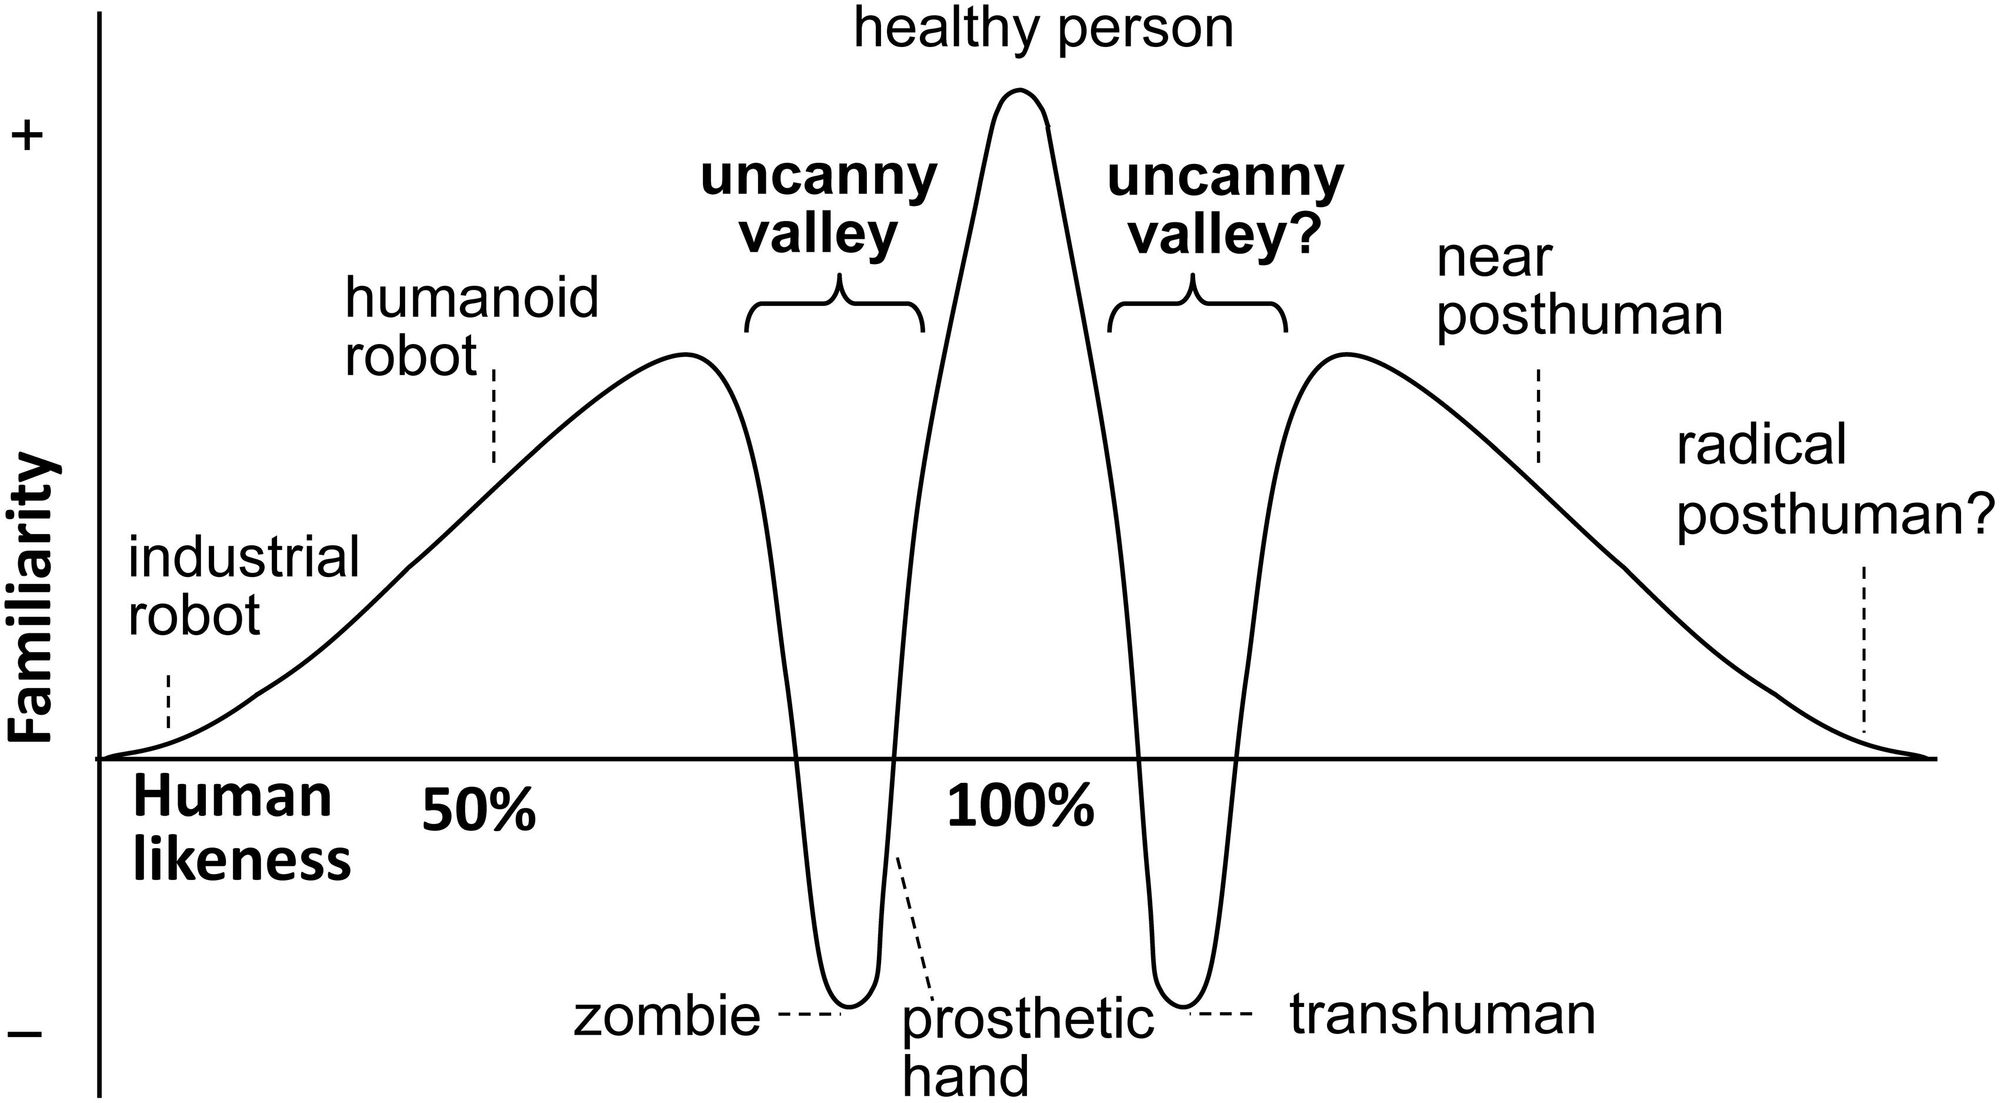 The Uncanny Valley, see source at the bottom.